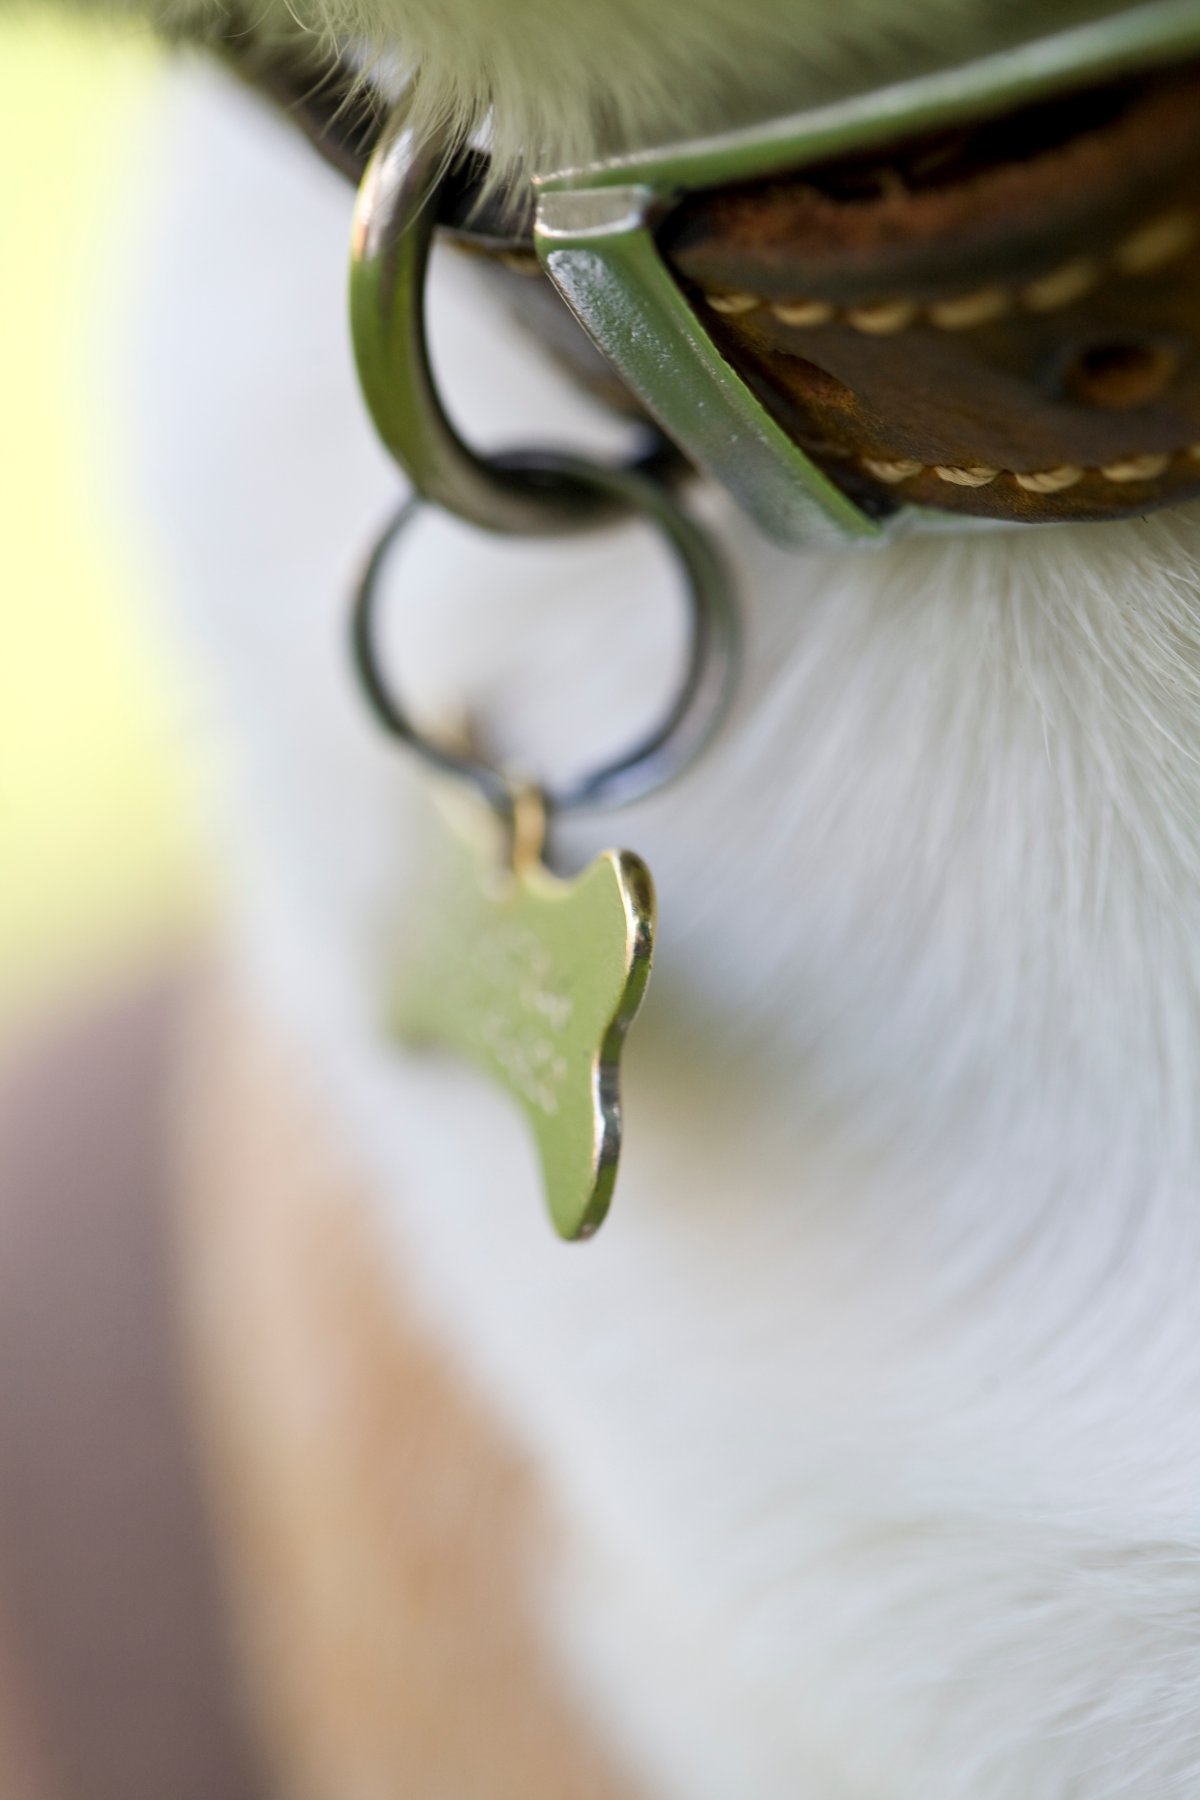 A stock photo of a dog collar and identification tag.